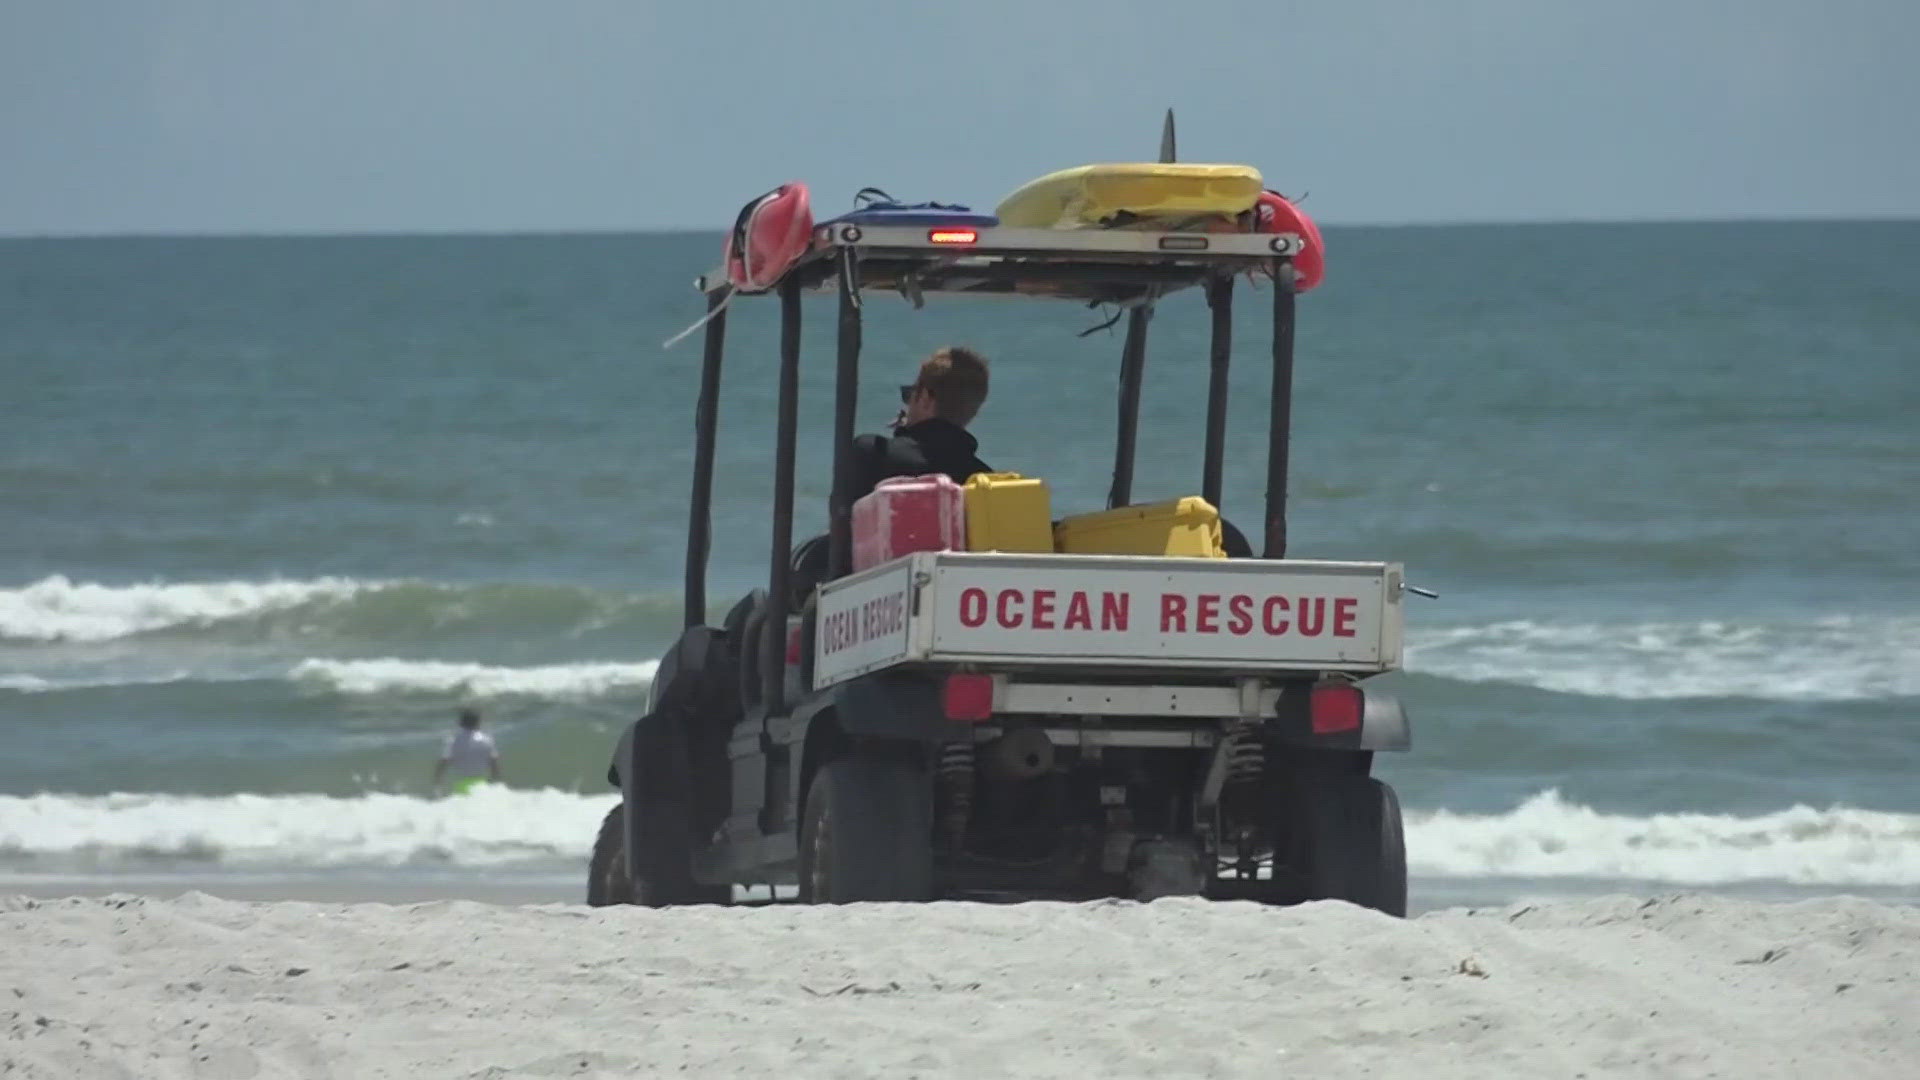 In the last two weeks, eight people have died in rip currents in Florida over just four days, according to the National Weather Service.